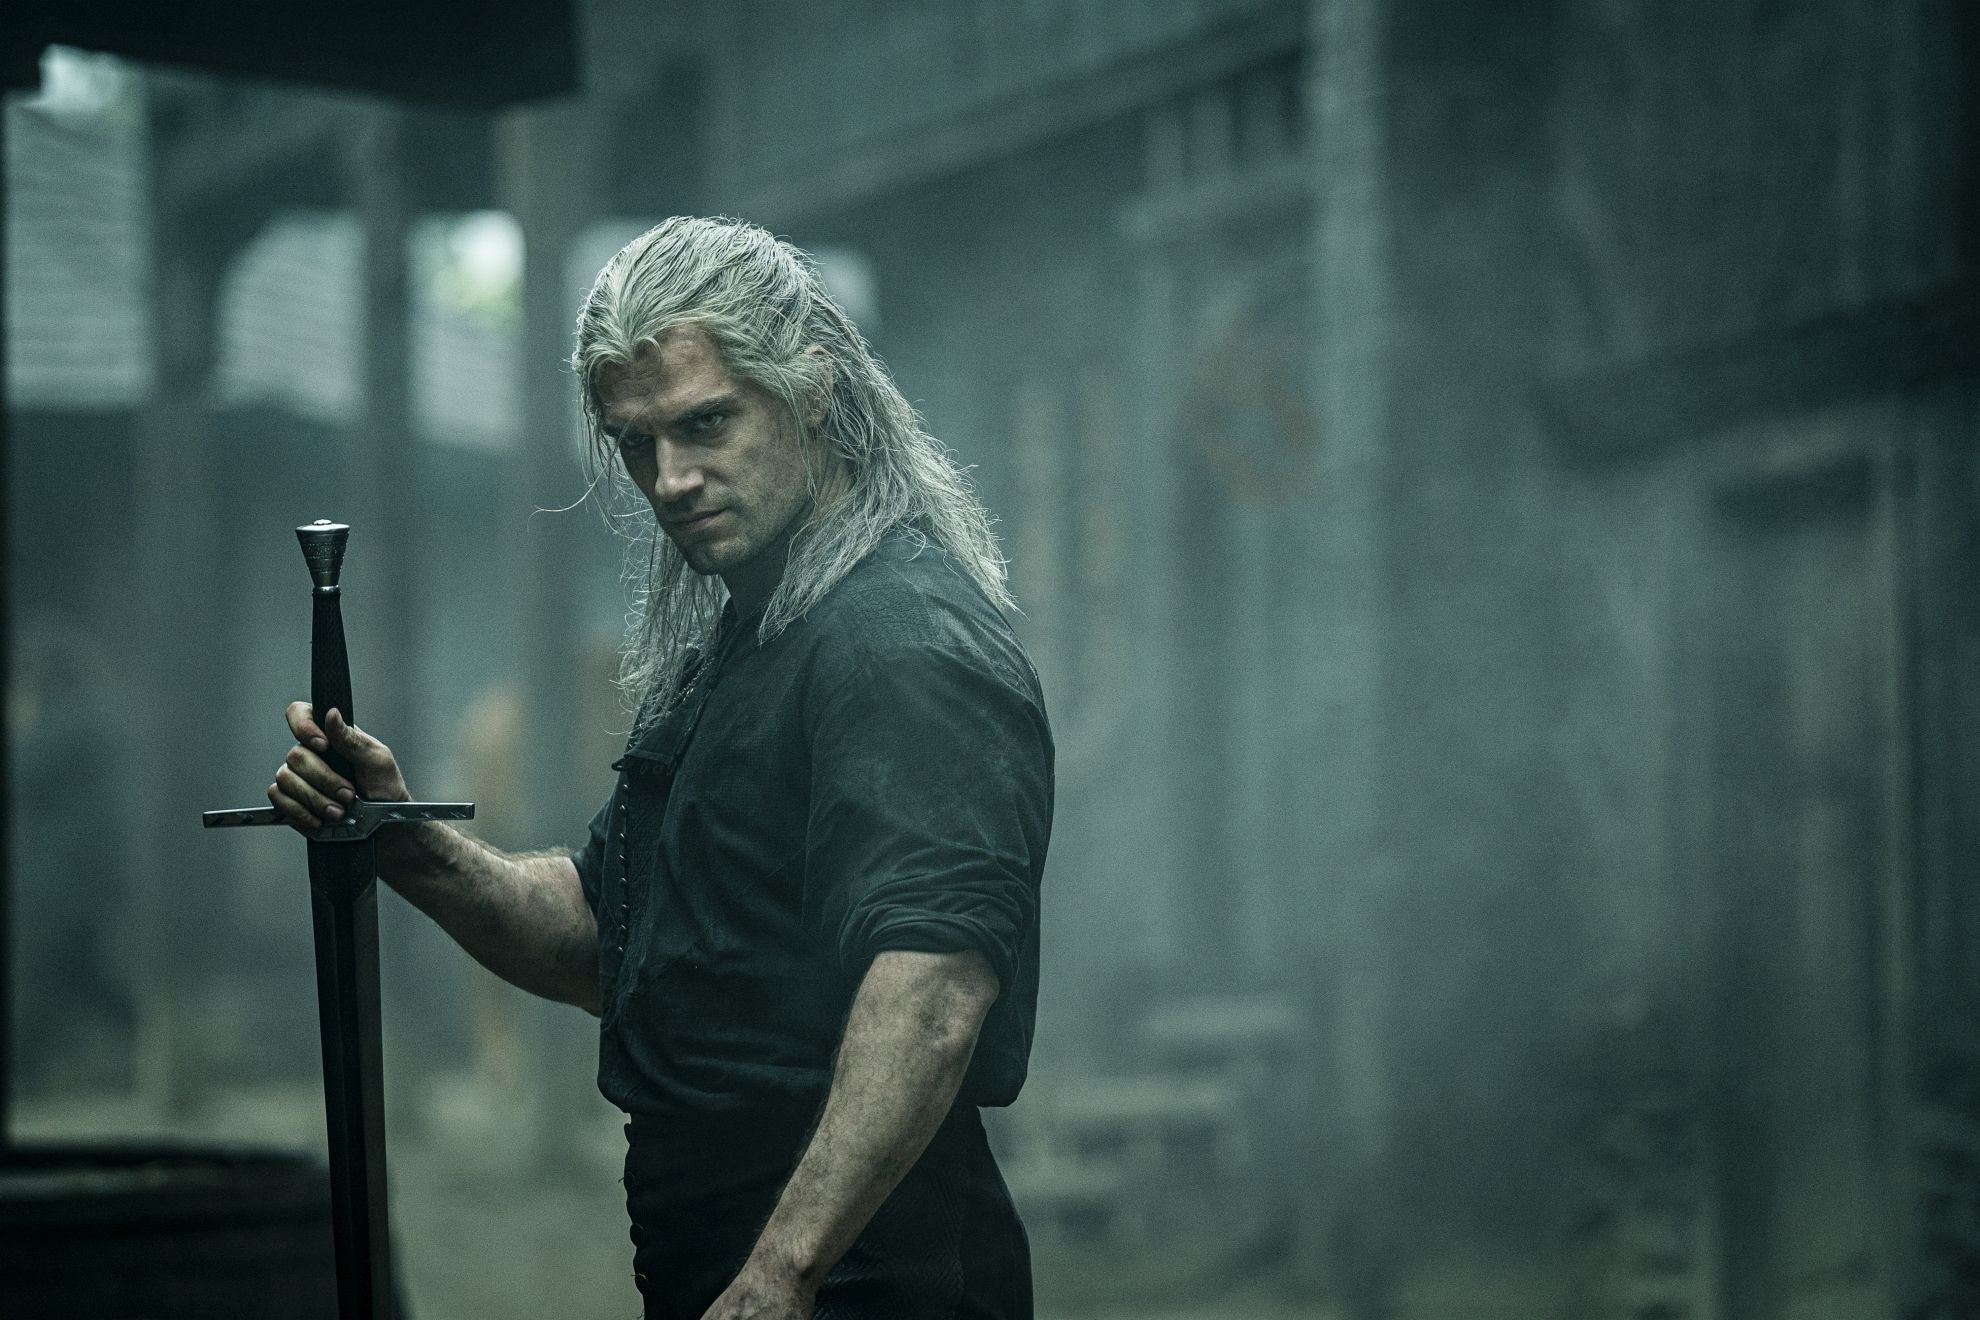 The Witcher: Nightmare of the Wolf: Vesemir Faces Fear This August